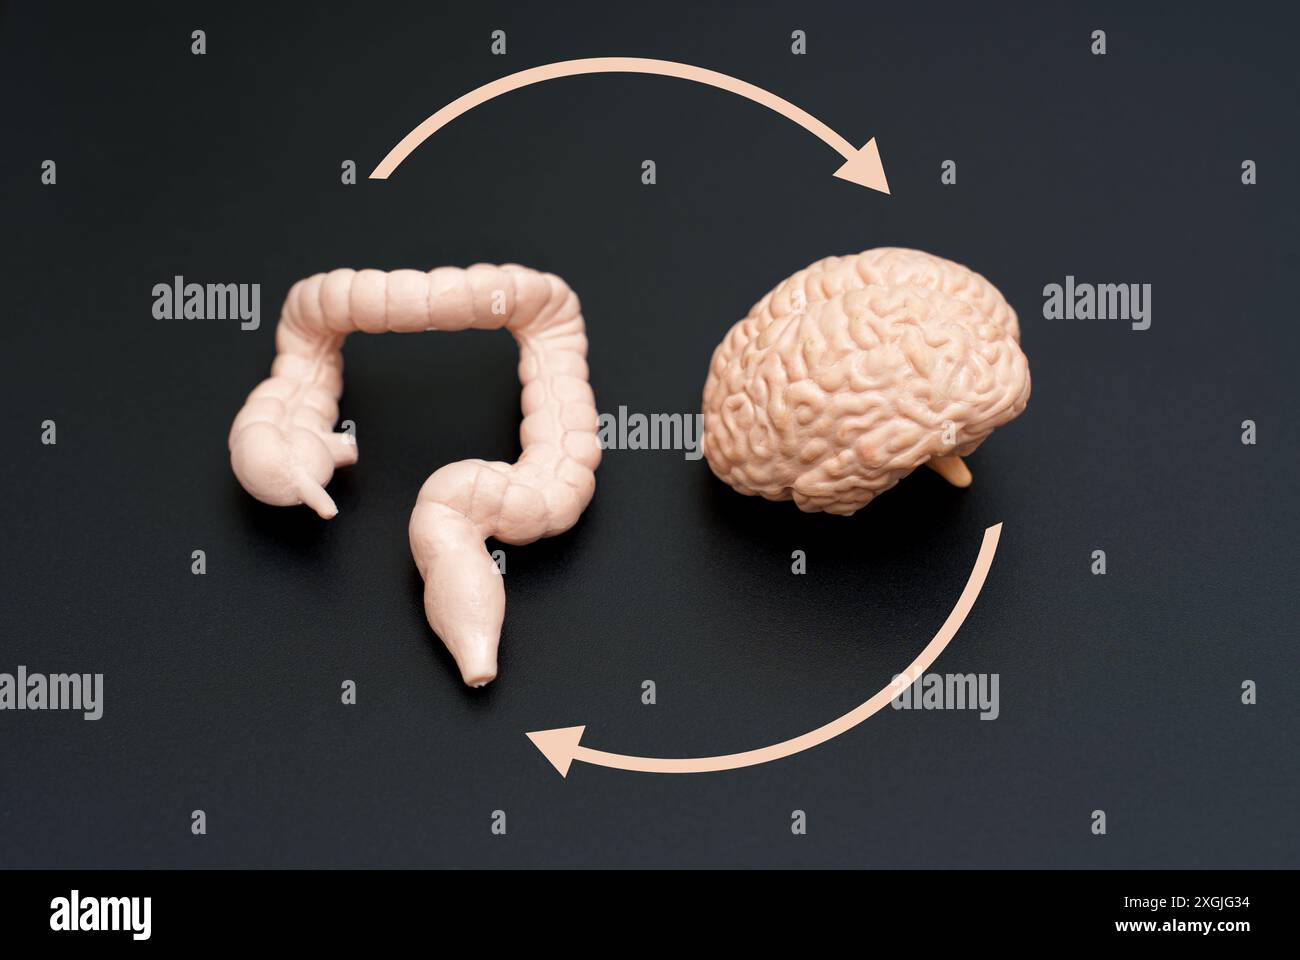 Conceptual illustration of gut-brain interaction, showing realistic brain and large intestine models connected by circular arrows on a dark background Stock Photo